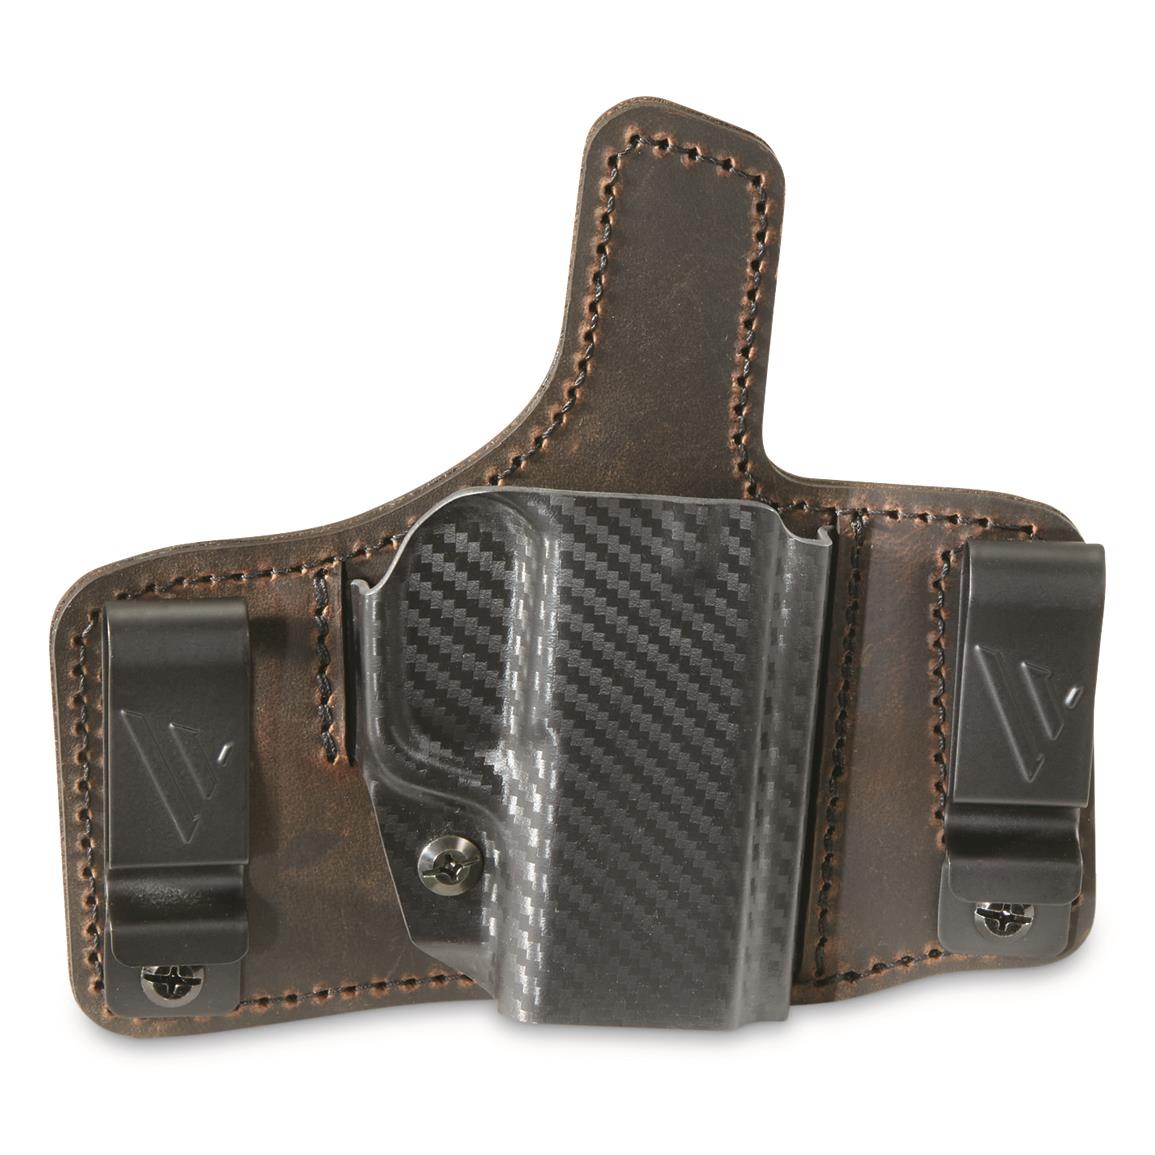 VersaCarry Insurgent Deluxe IWB/OWB Holster, Right Hand Draw, Glock 19